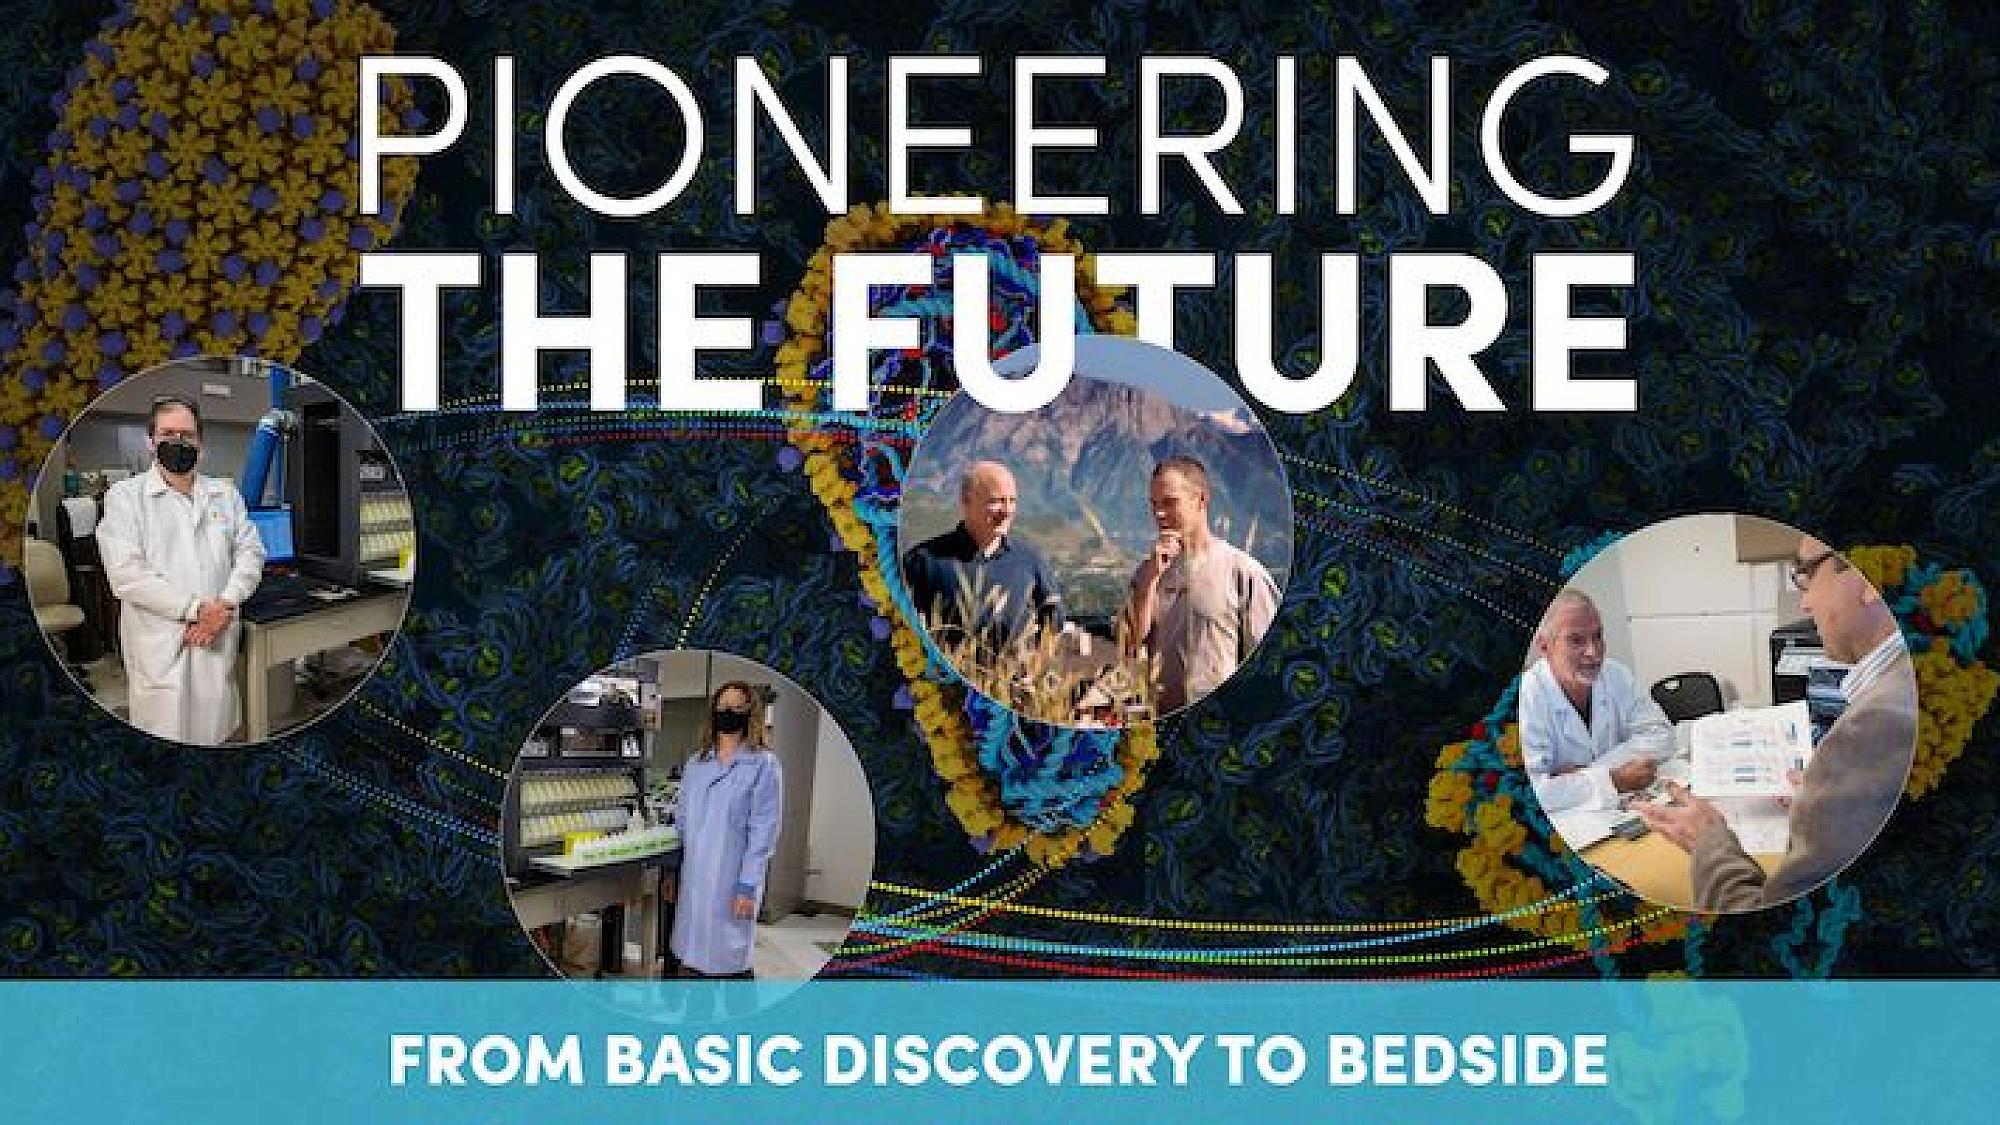 Pioneering the Future: From Basic Discovery to Bedside